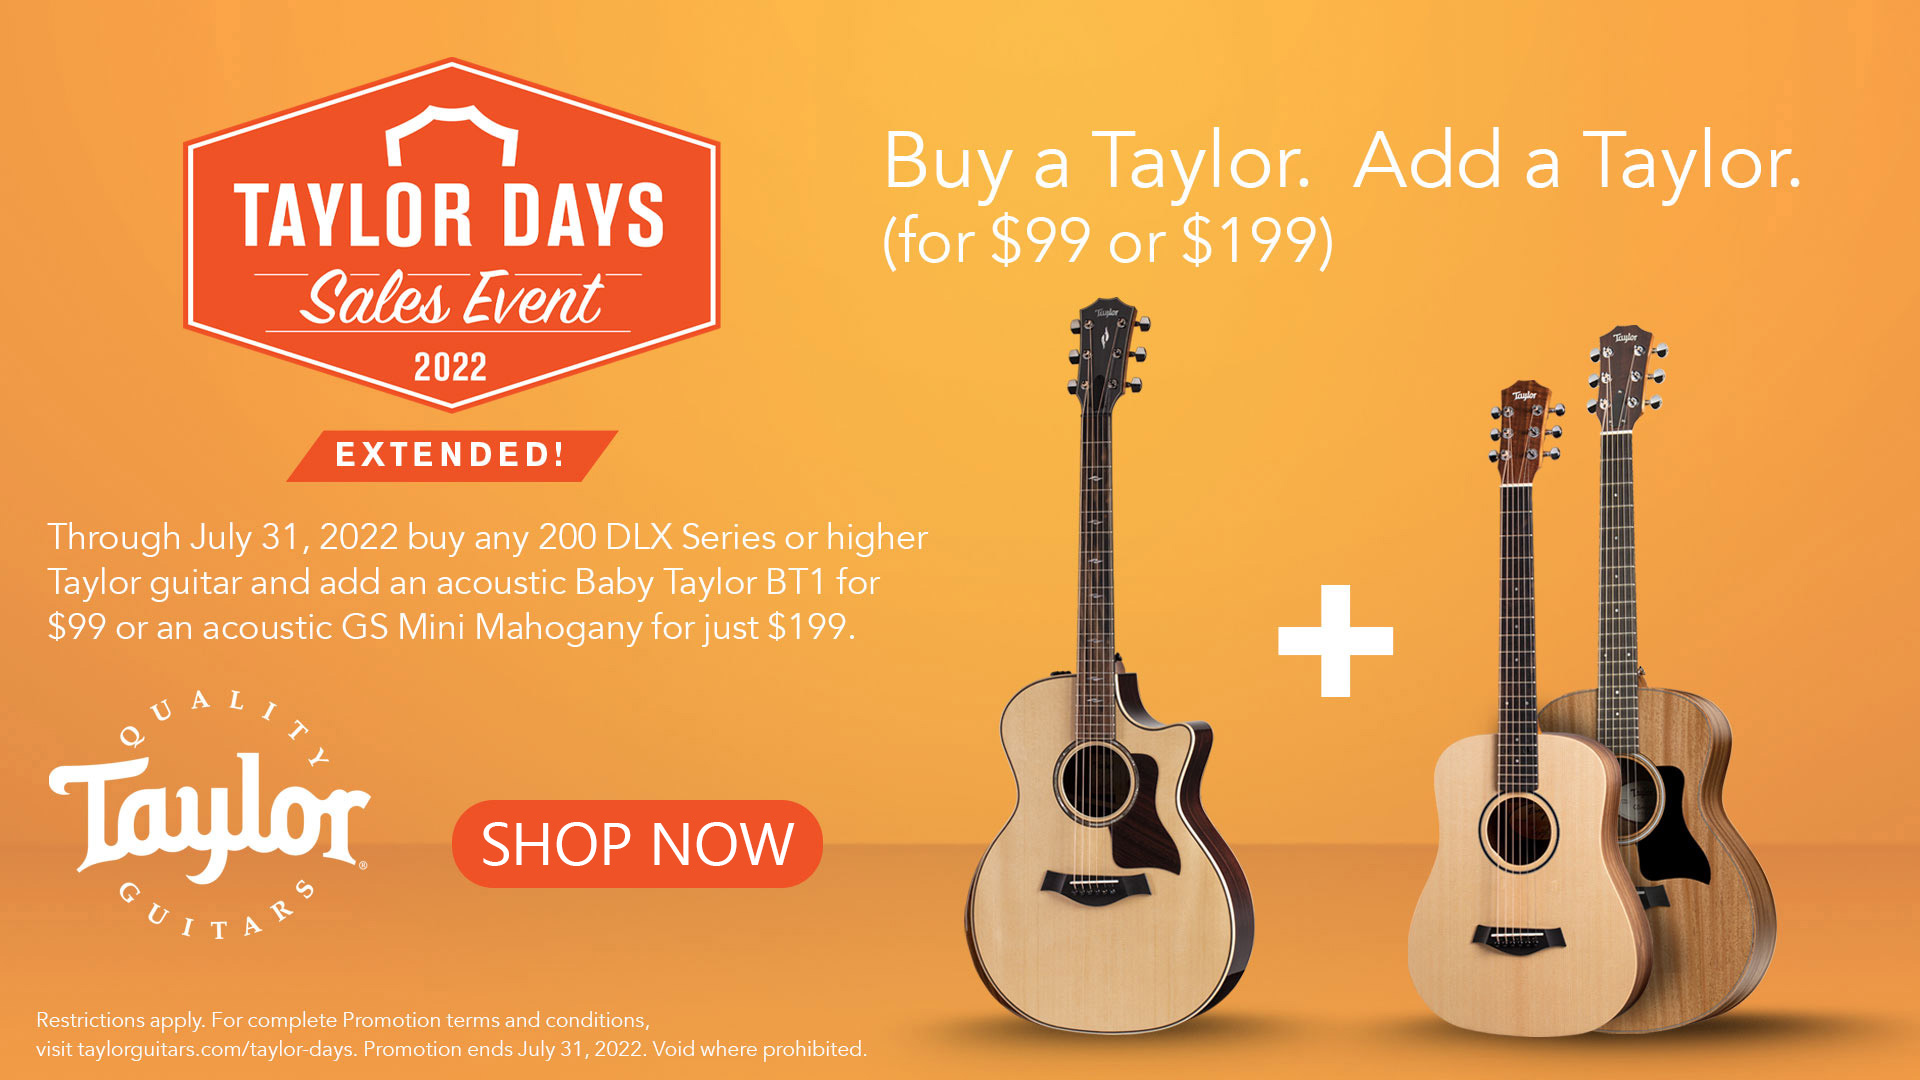 Taylor Days Promotional Banner - Buy a Taylor Add a Taylor